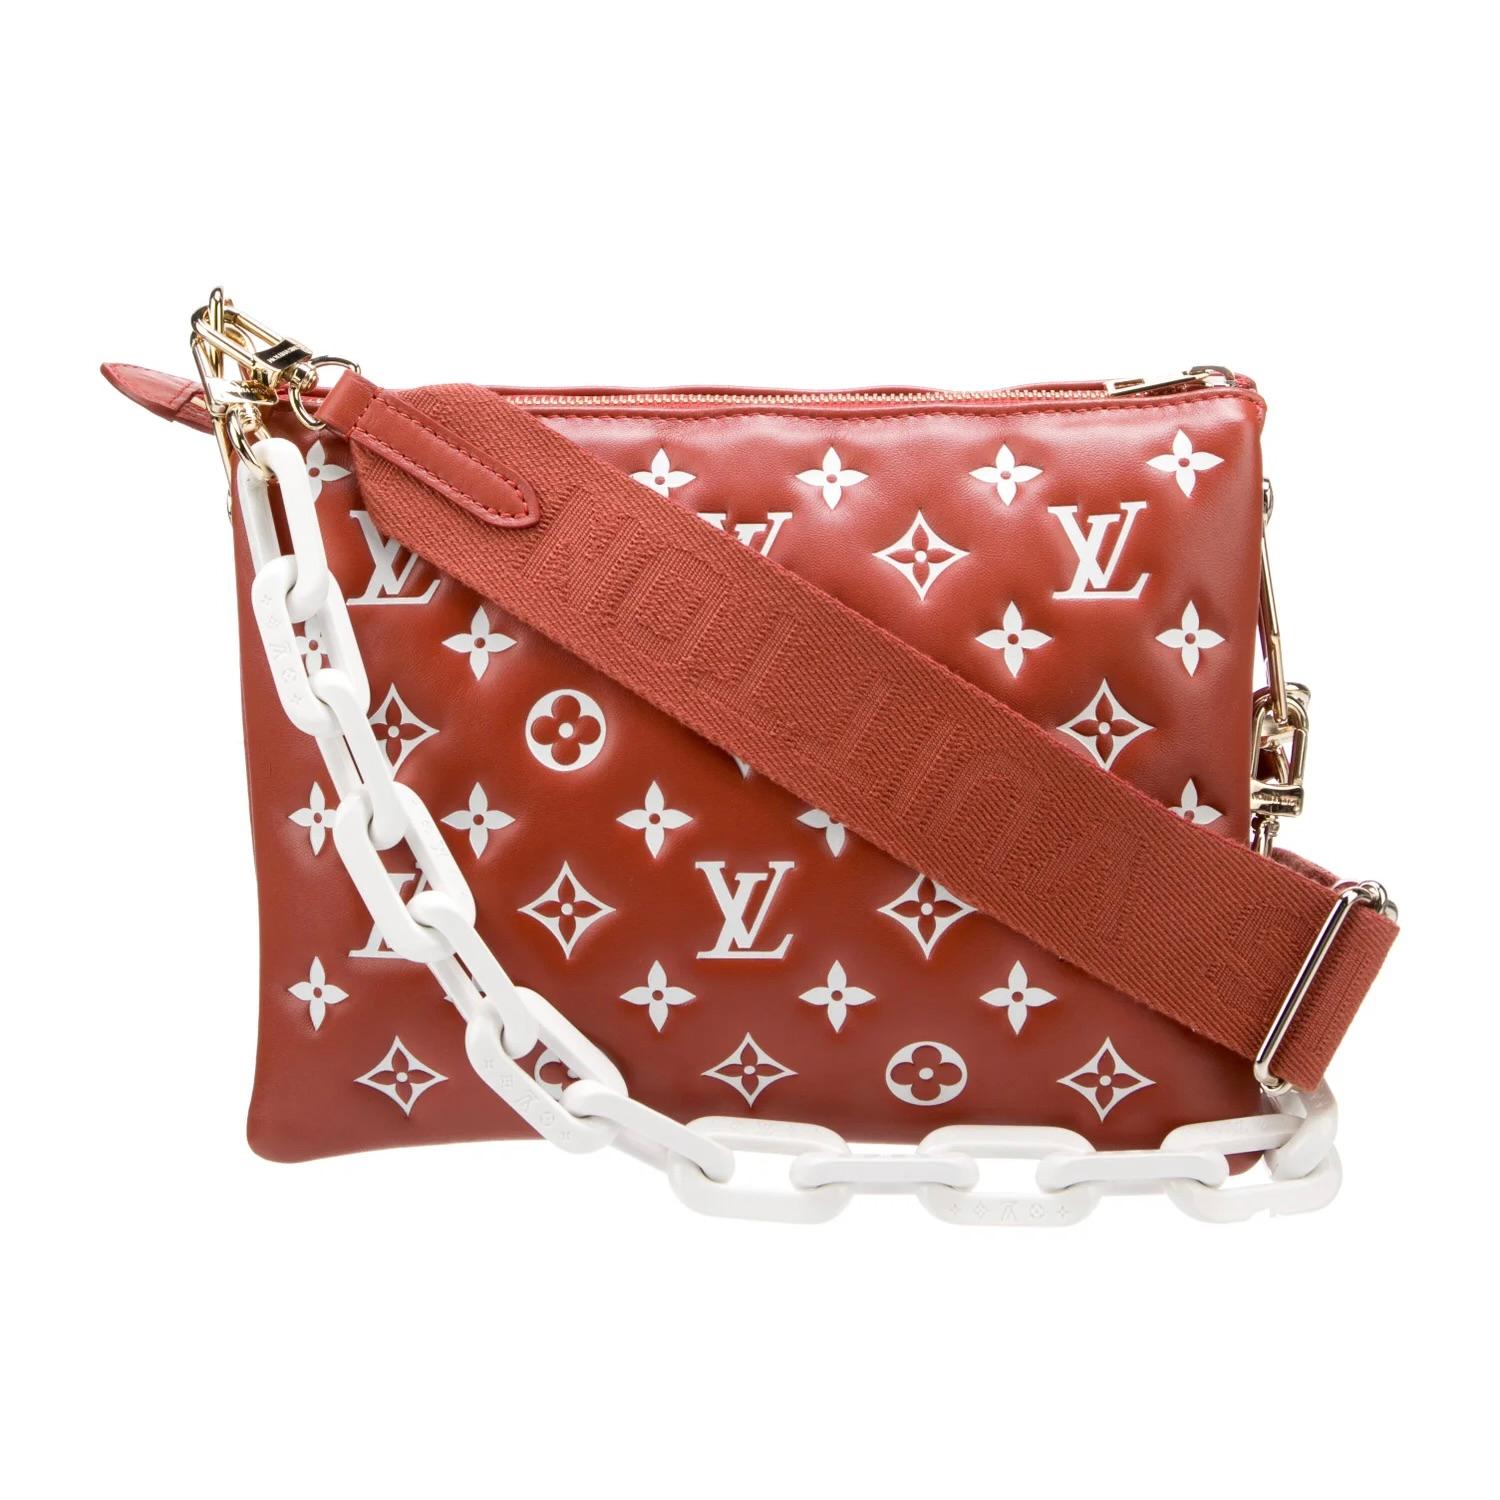 Louis Vuitton Red Lambskin Monogram Coussin Pm Shoulder Bag In Excellent Condition For Sale In Montreal, Quebec